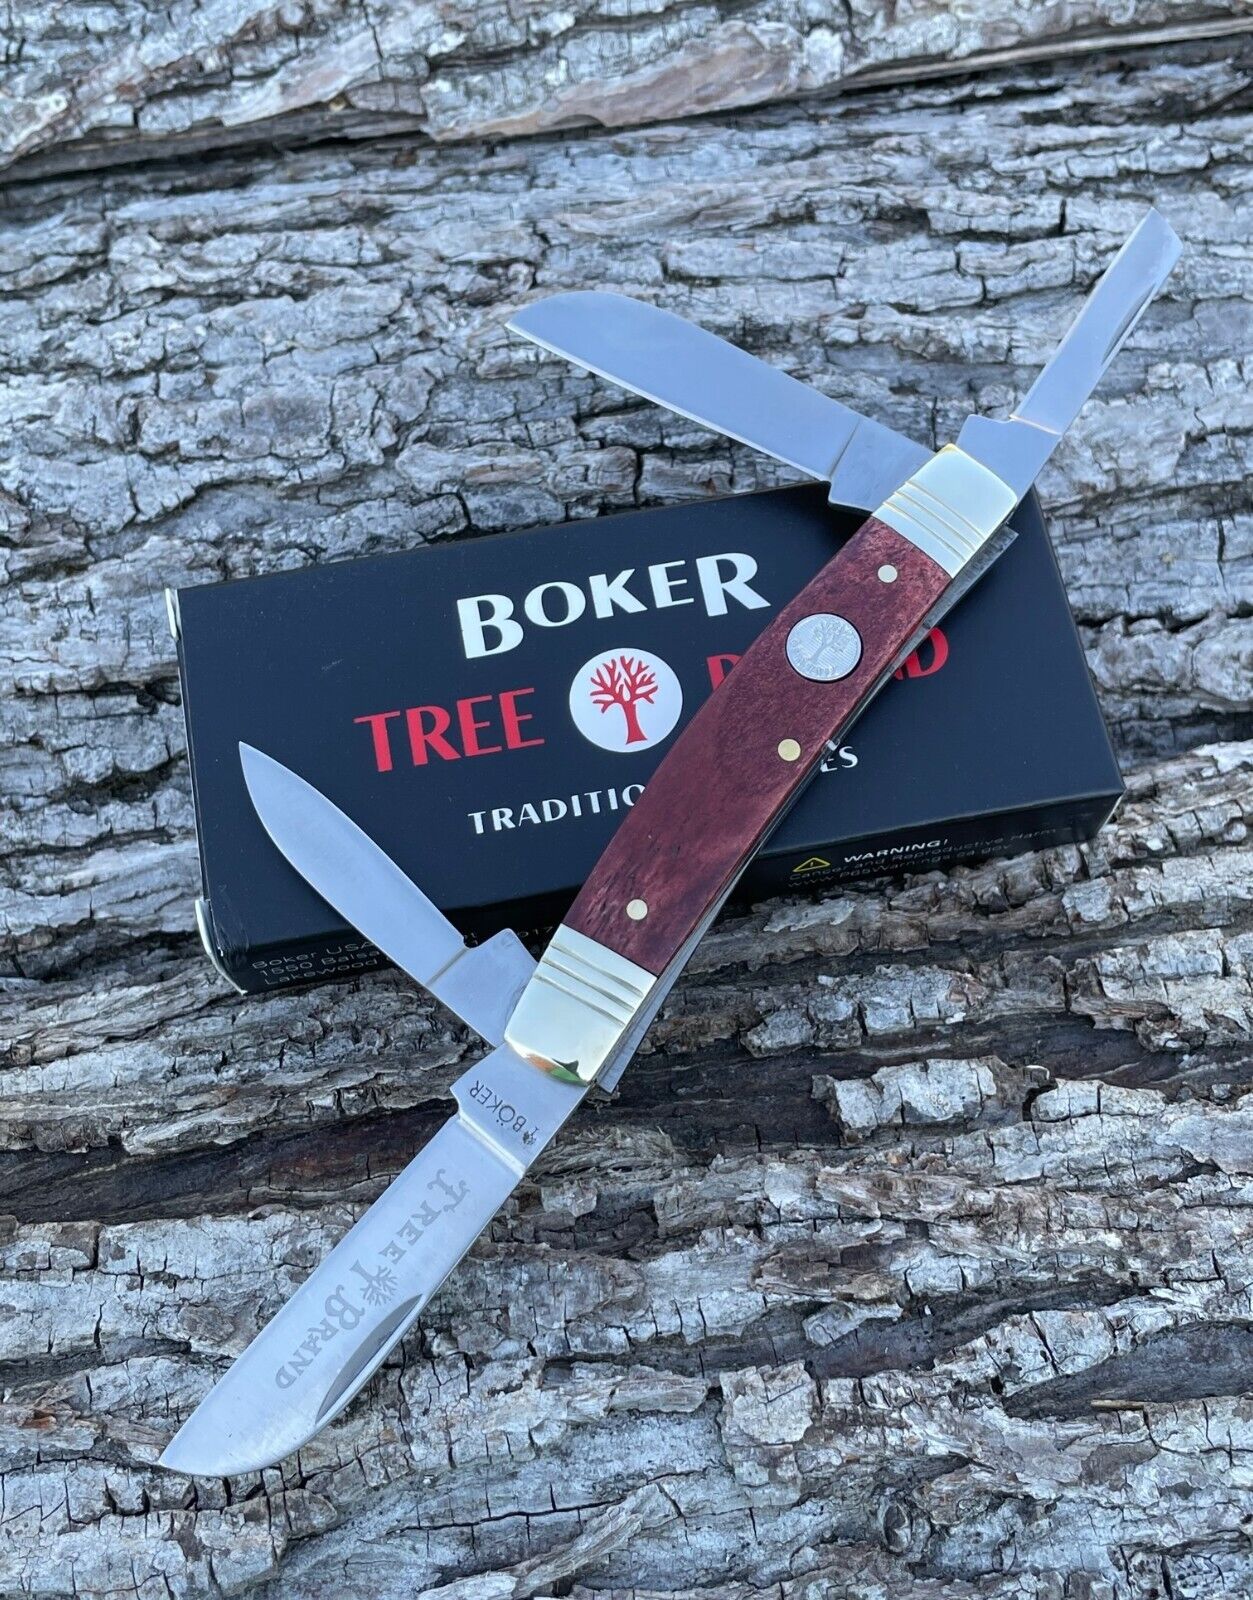 TREE BRAND BOKER d 1095 CARBON BLADES SMOOTH BROWN 4 BLADE CONGRESS KNIFE KNIVES